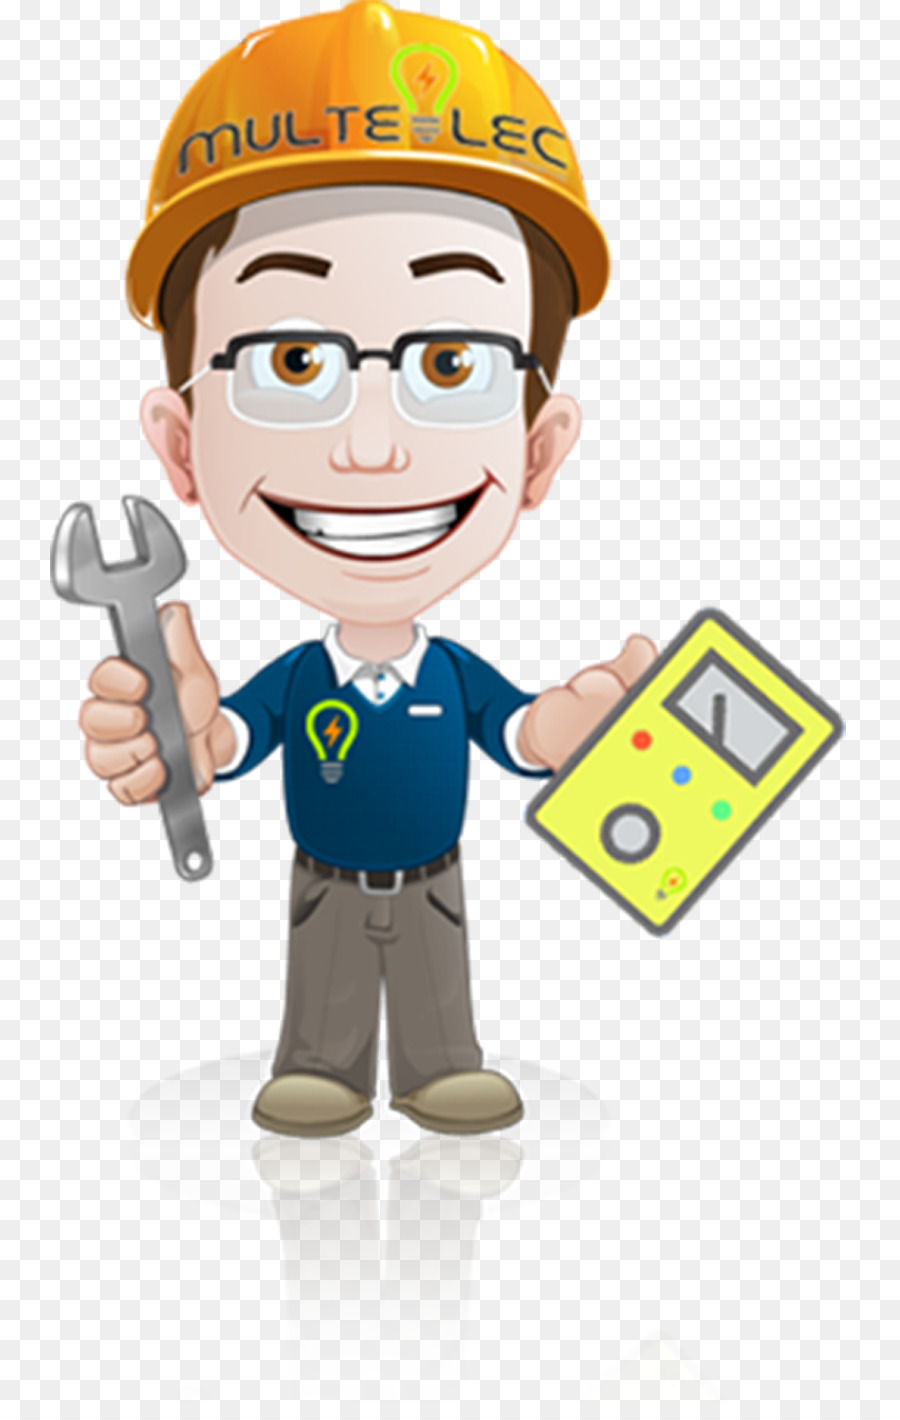 electrician clipart electrical engineering